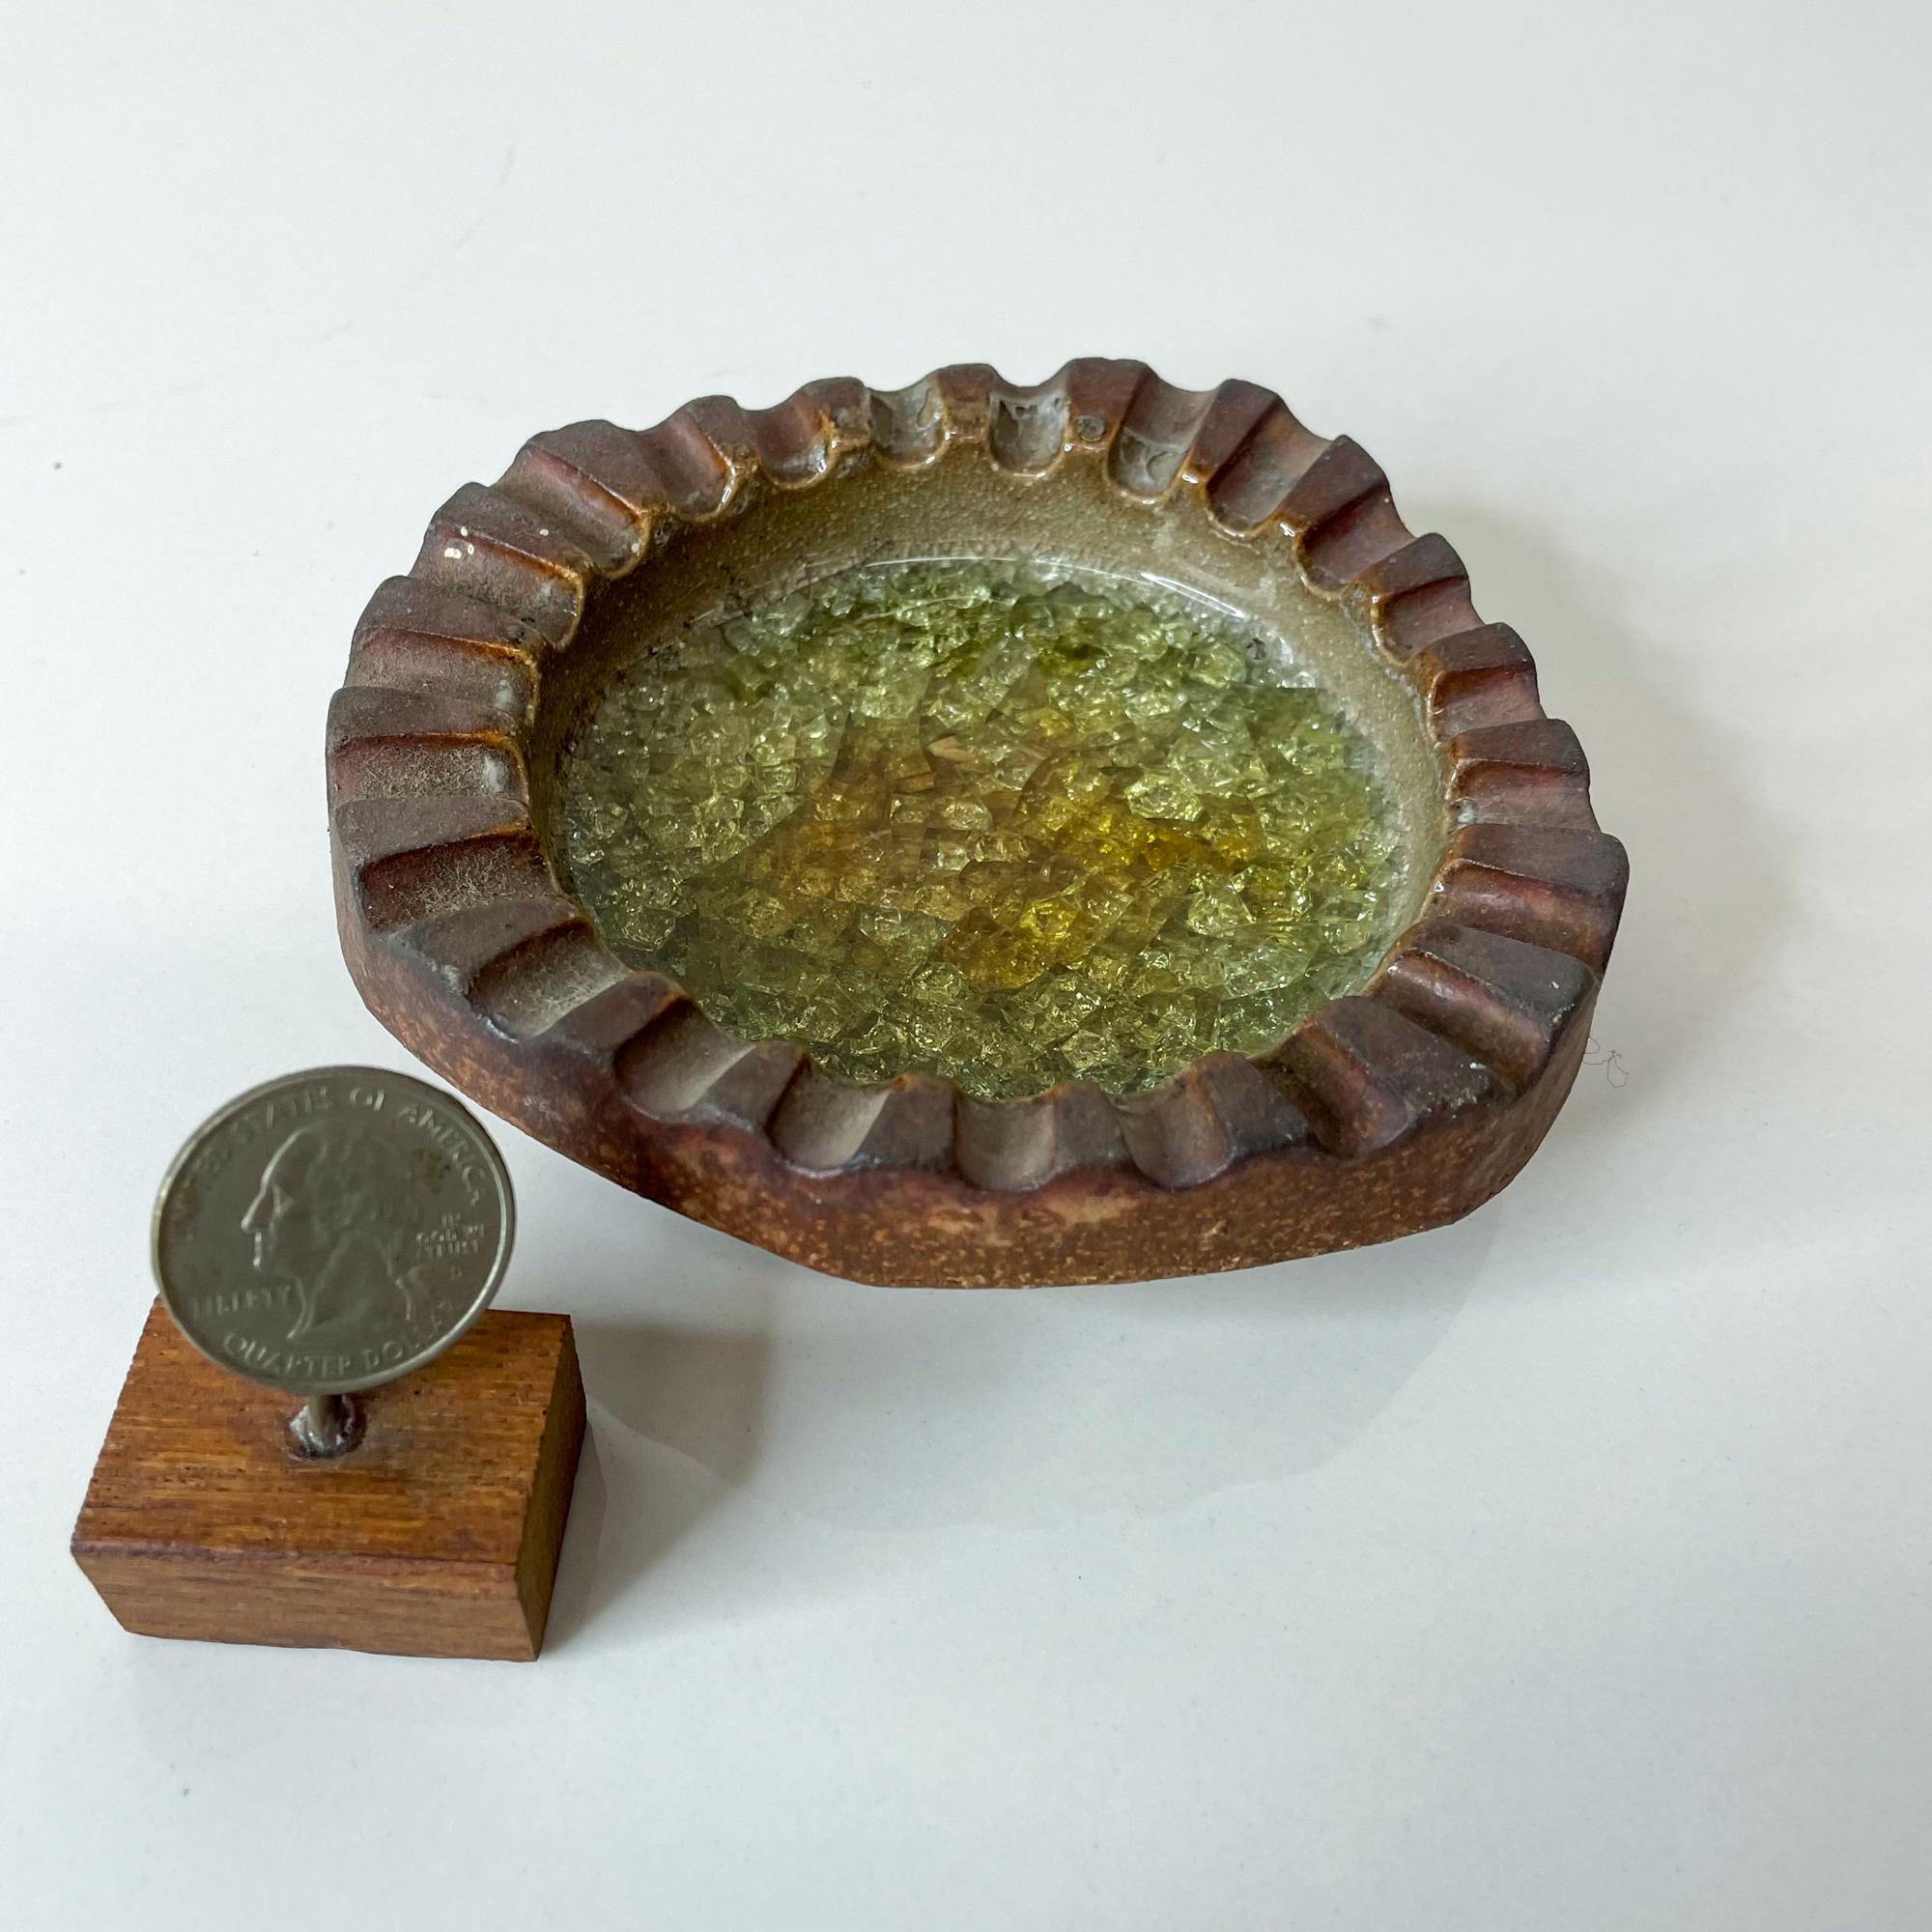 Robert Maxwell decorative ashtray catch it all dish in stoneware pottery glaze and glass
Studio Pottery Art from Santa Monica CALIFORNIA 1960s
By renowned California art ceramicist Robert Maxwell ashtray in an irregular, crenellated edge +